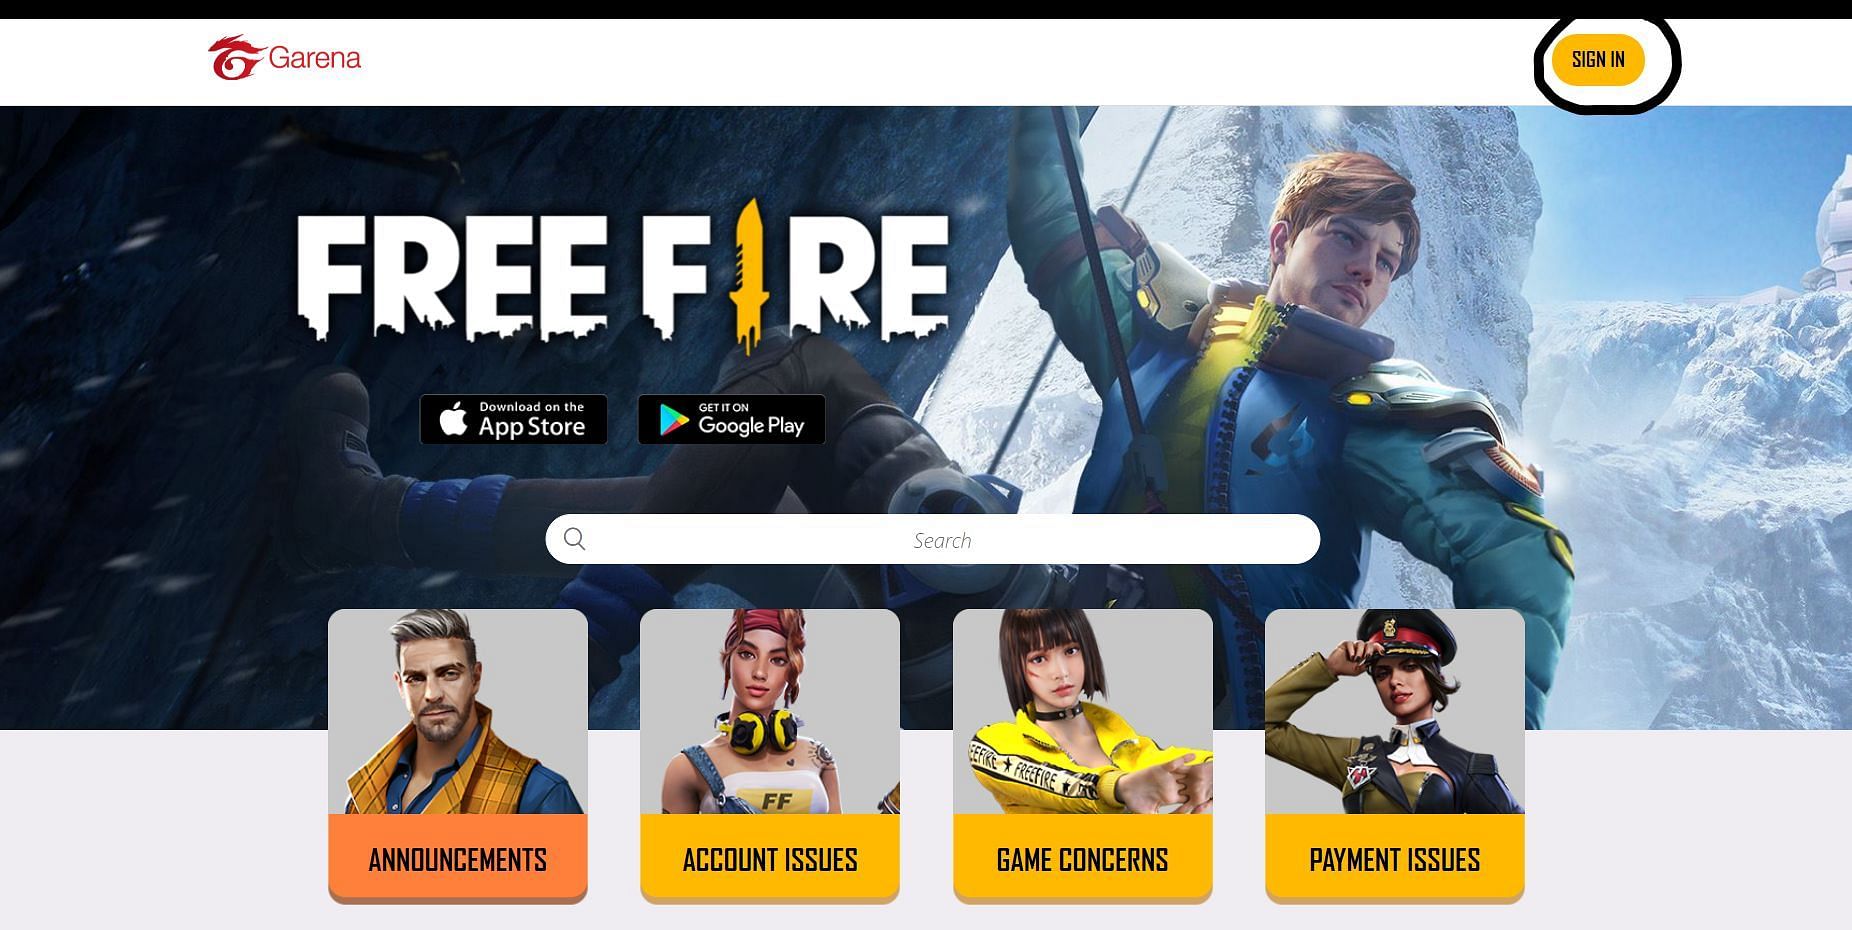 175,000 Free Fire MAX Cheater and Hacker Accounts Banned by Garena